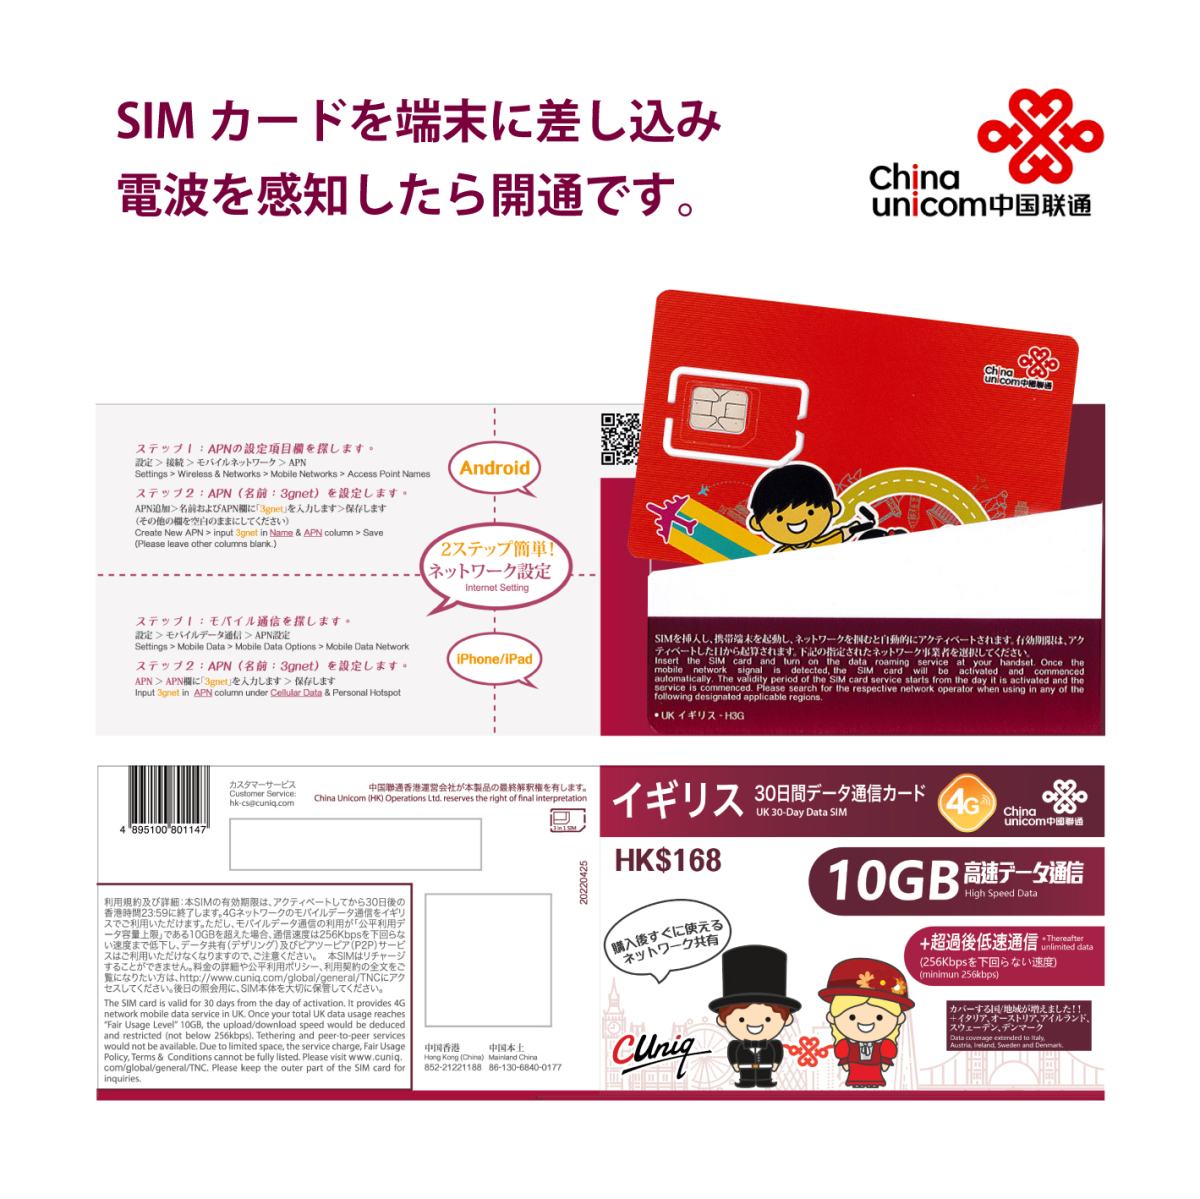  England other total 6. country data communication SIM card (10GB/30 day ) England sim China . through Italy Austria i-ll Land Sweden Denmark 